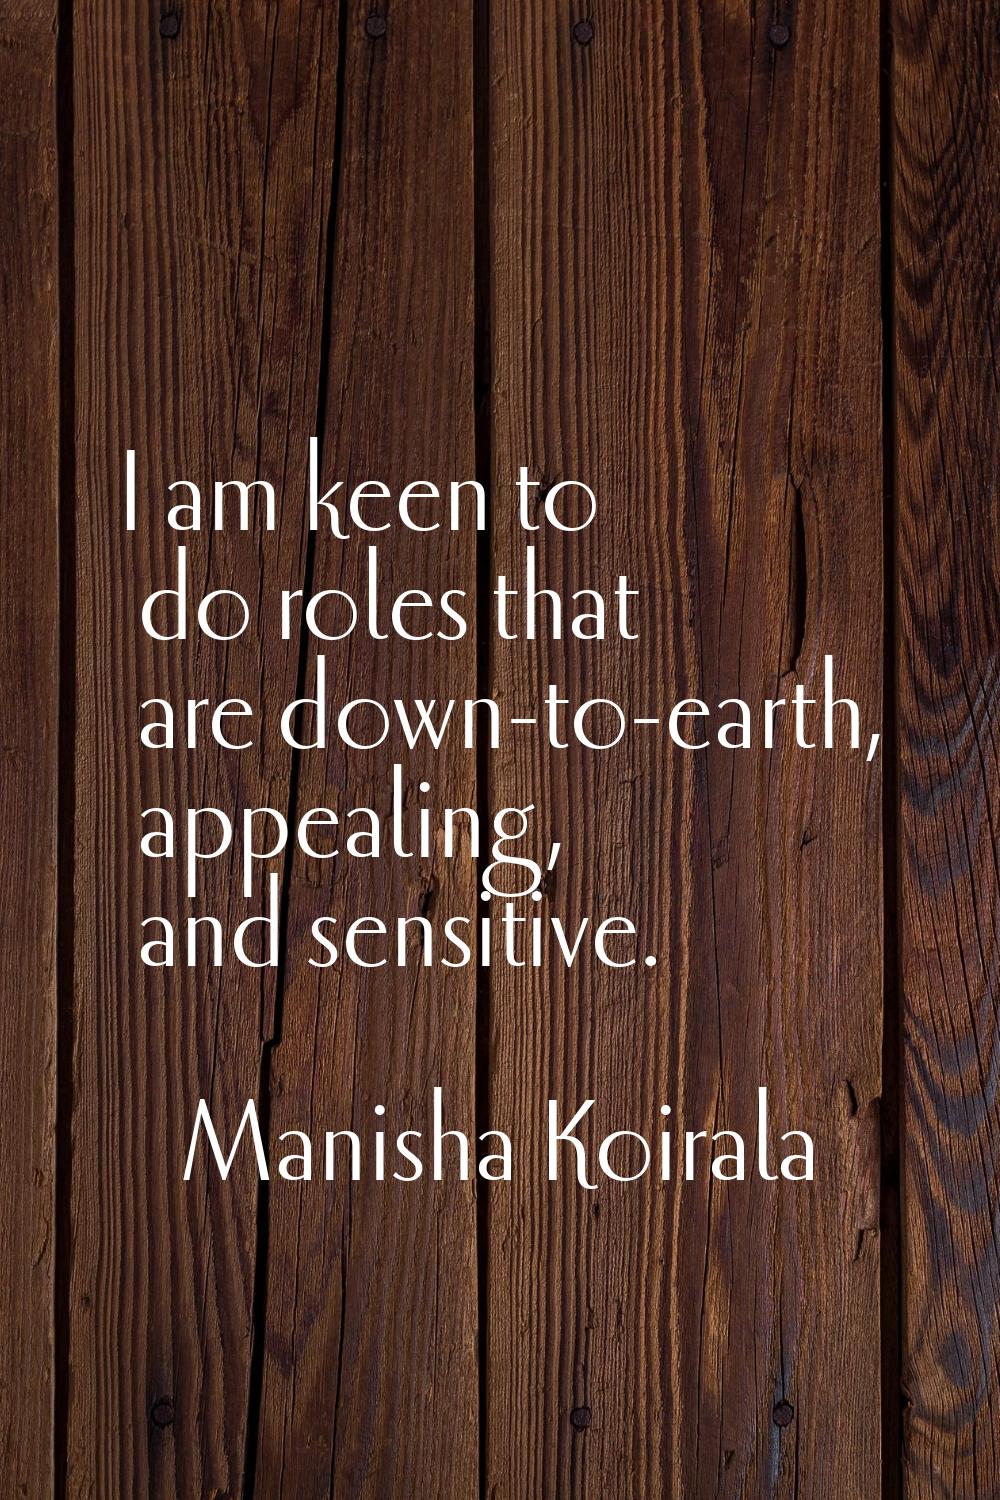 I am keen to do roles that are down-to-earth, appealing, and sensitive.